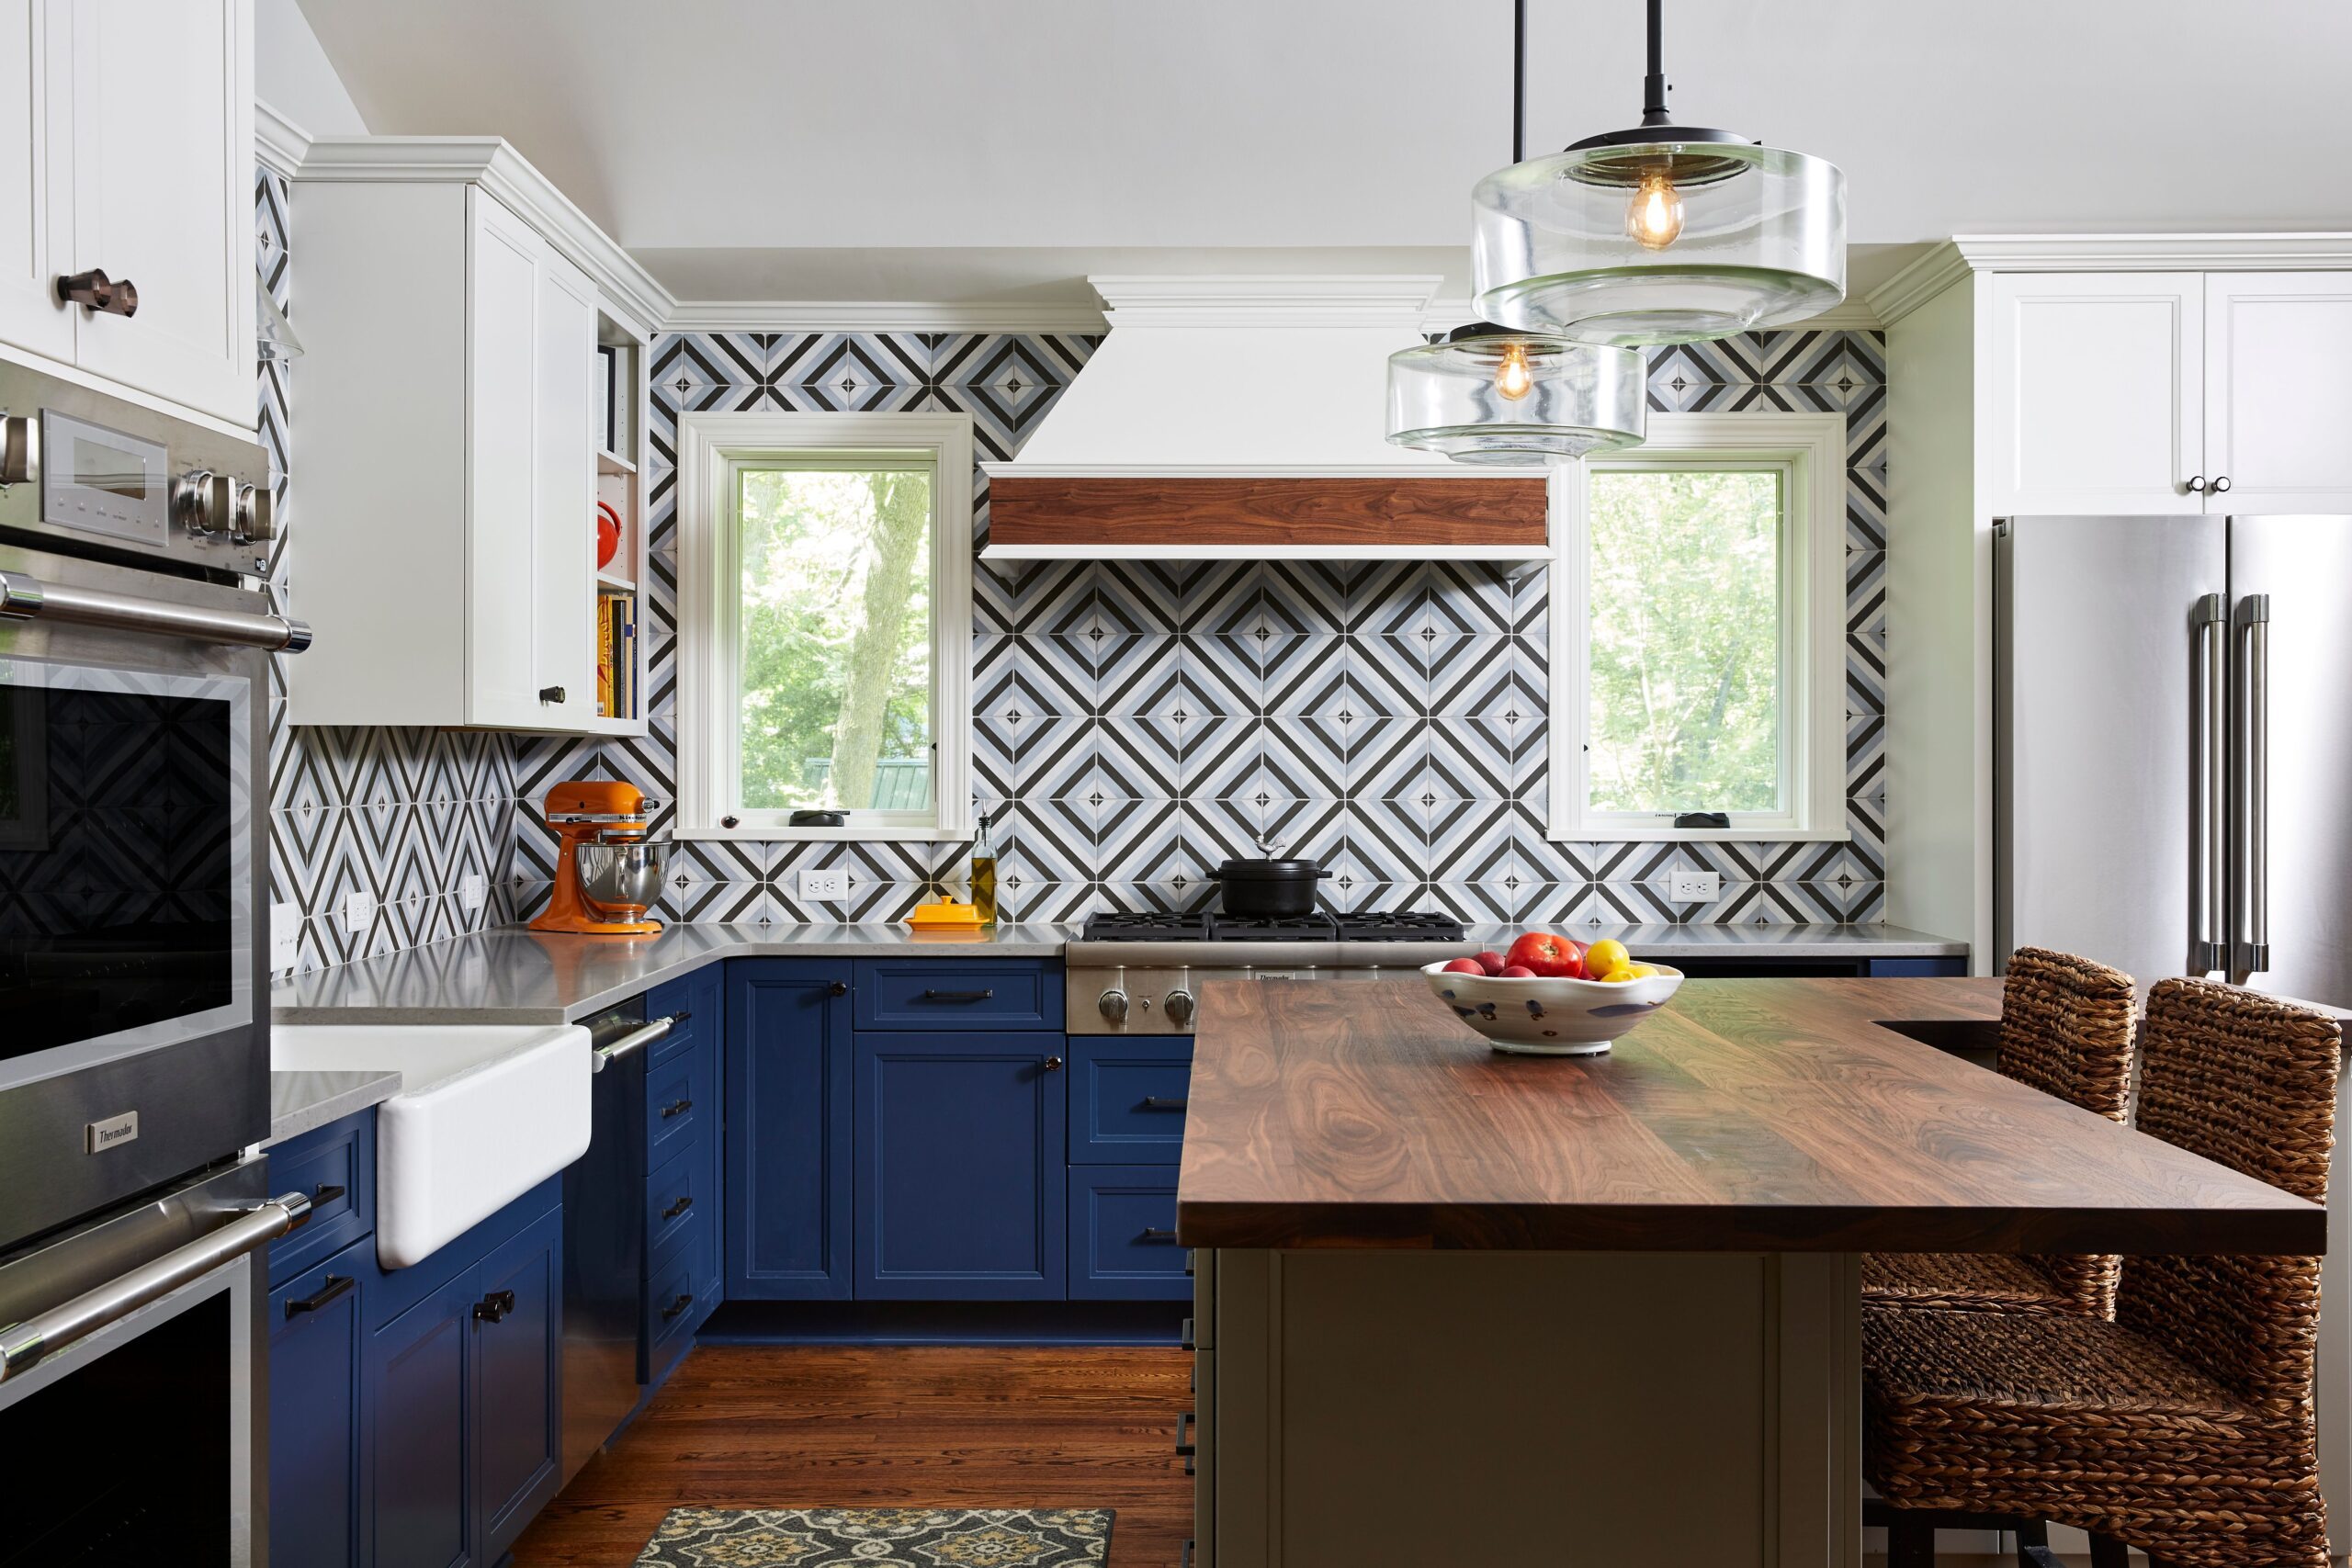 Kitchen Countertops: When You Don’t Want the Same Old, Same Old.